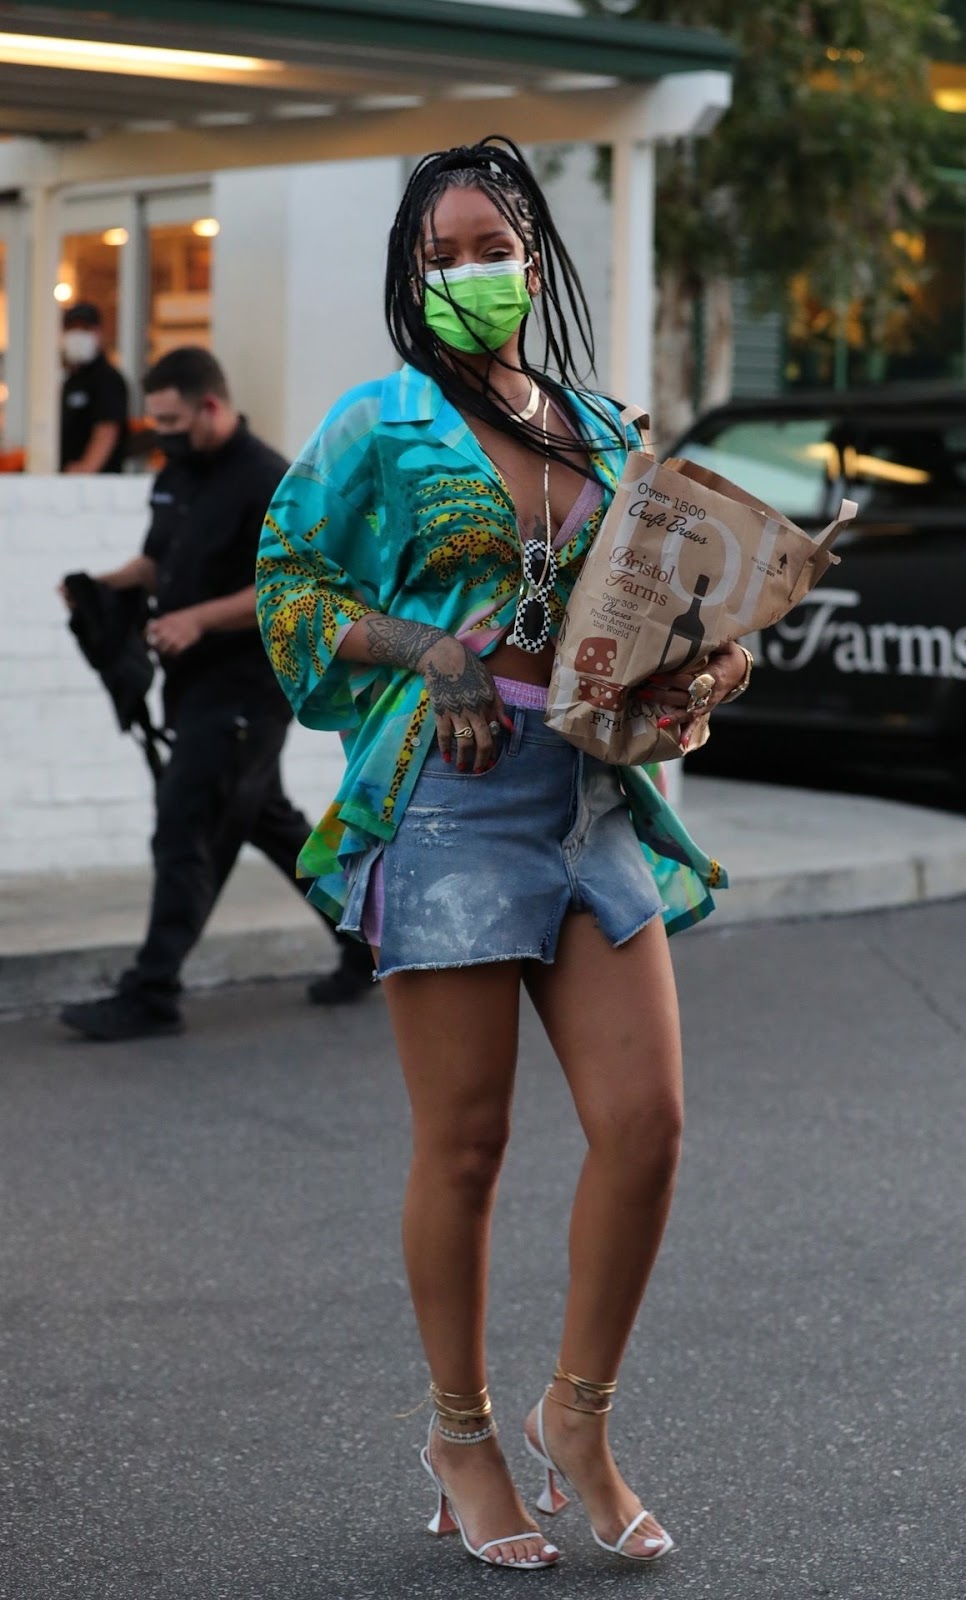 Rihanna is spotted during a grocery run at Bristol in tropical-themed shirt and micro blue jean skirt